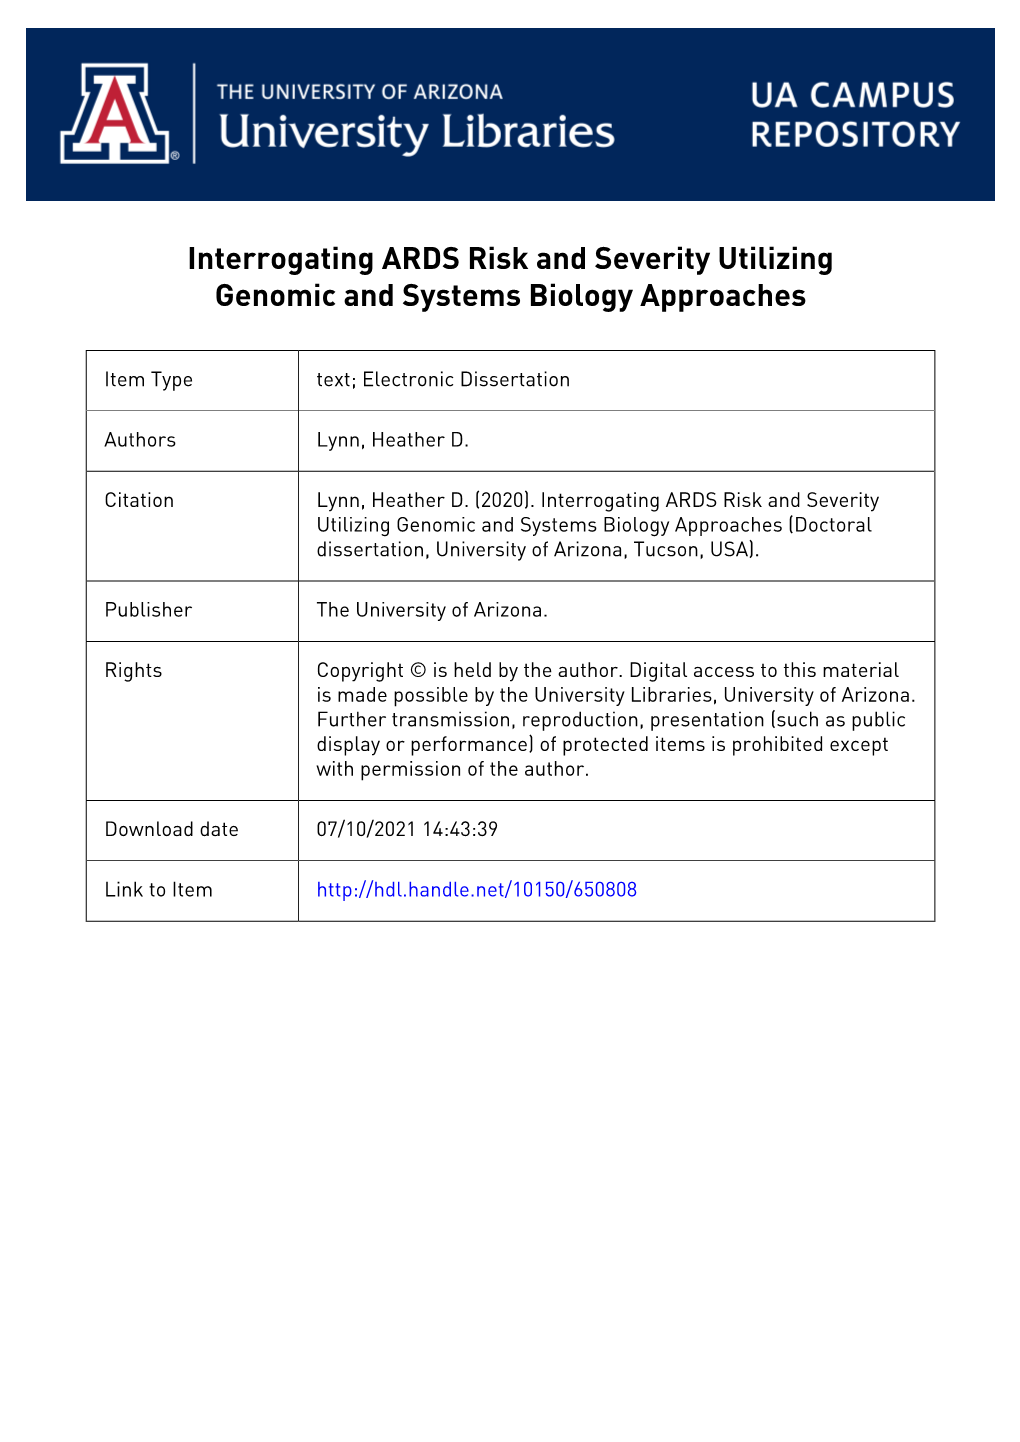 Interrogating ARDS Risk and Severity Utilizing Genomic and Systems Biology Approaches